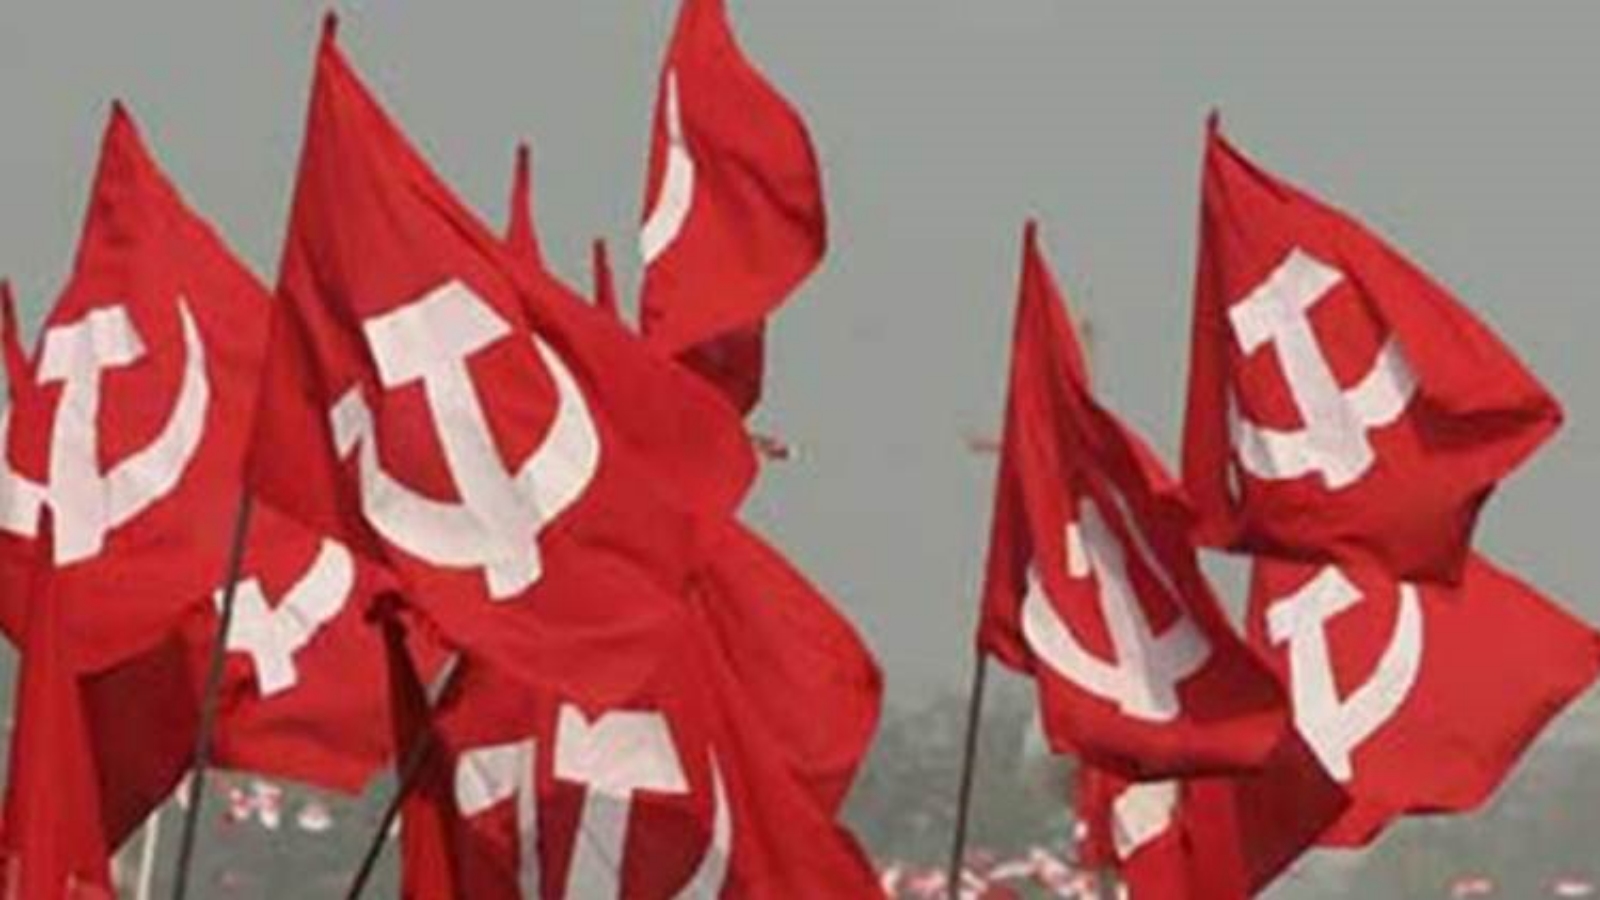 CPI(M): TMC wouldn't have come to power without Cong support